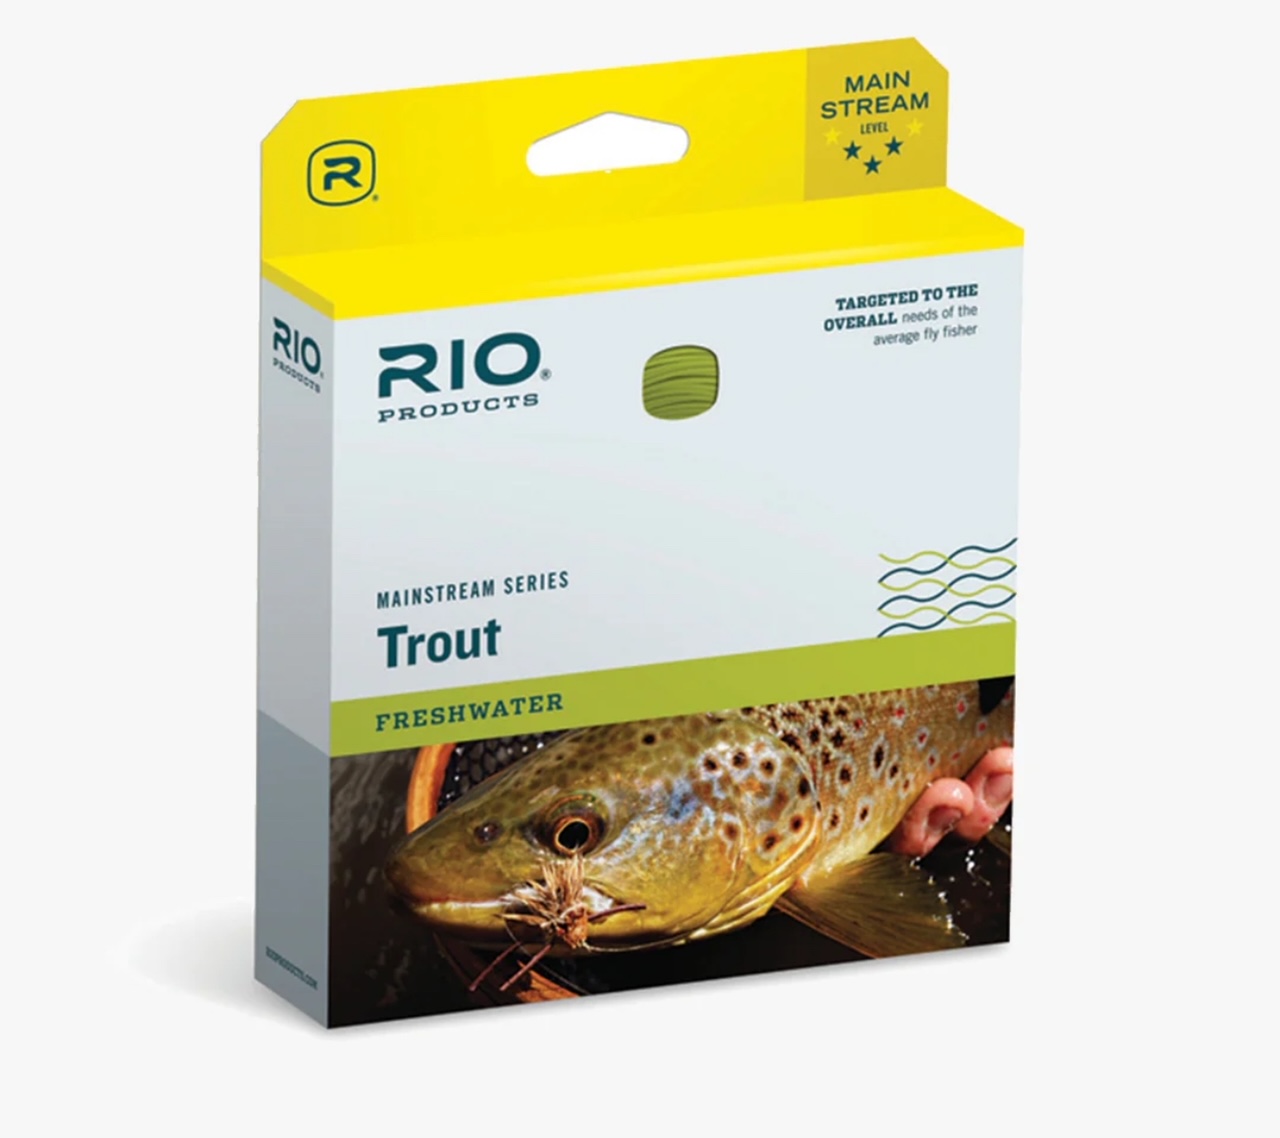 Rio Products Mainstream Trout